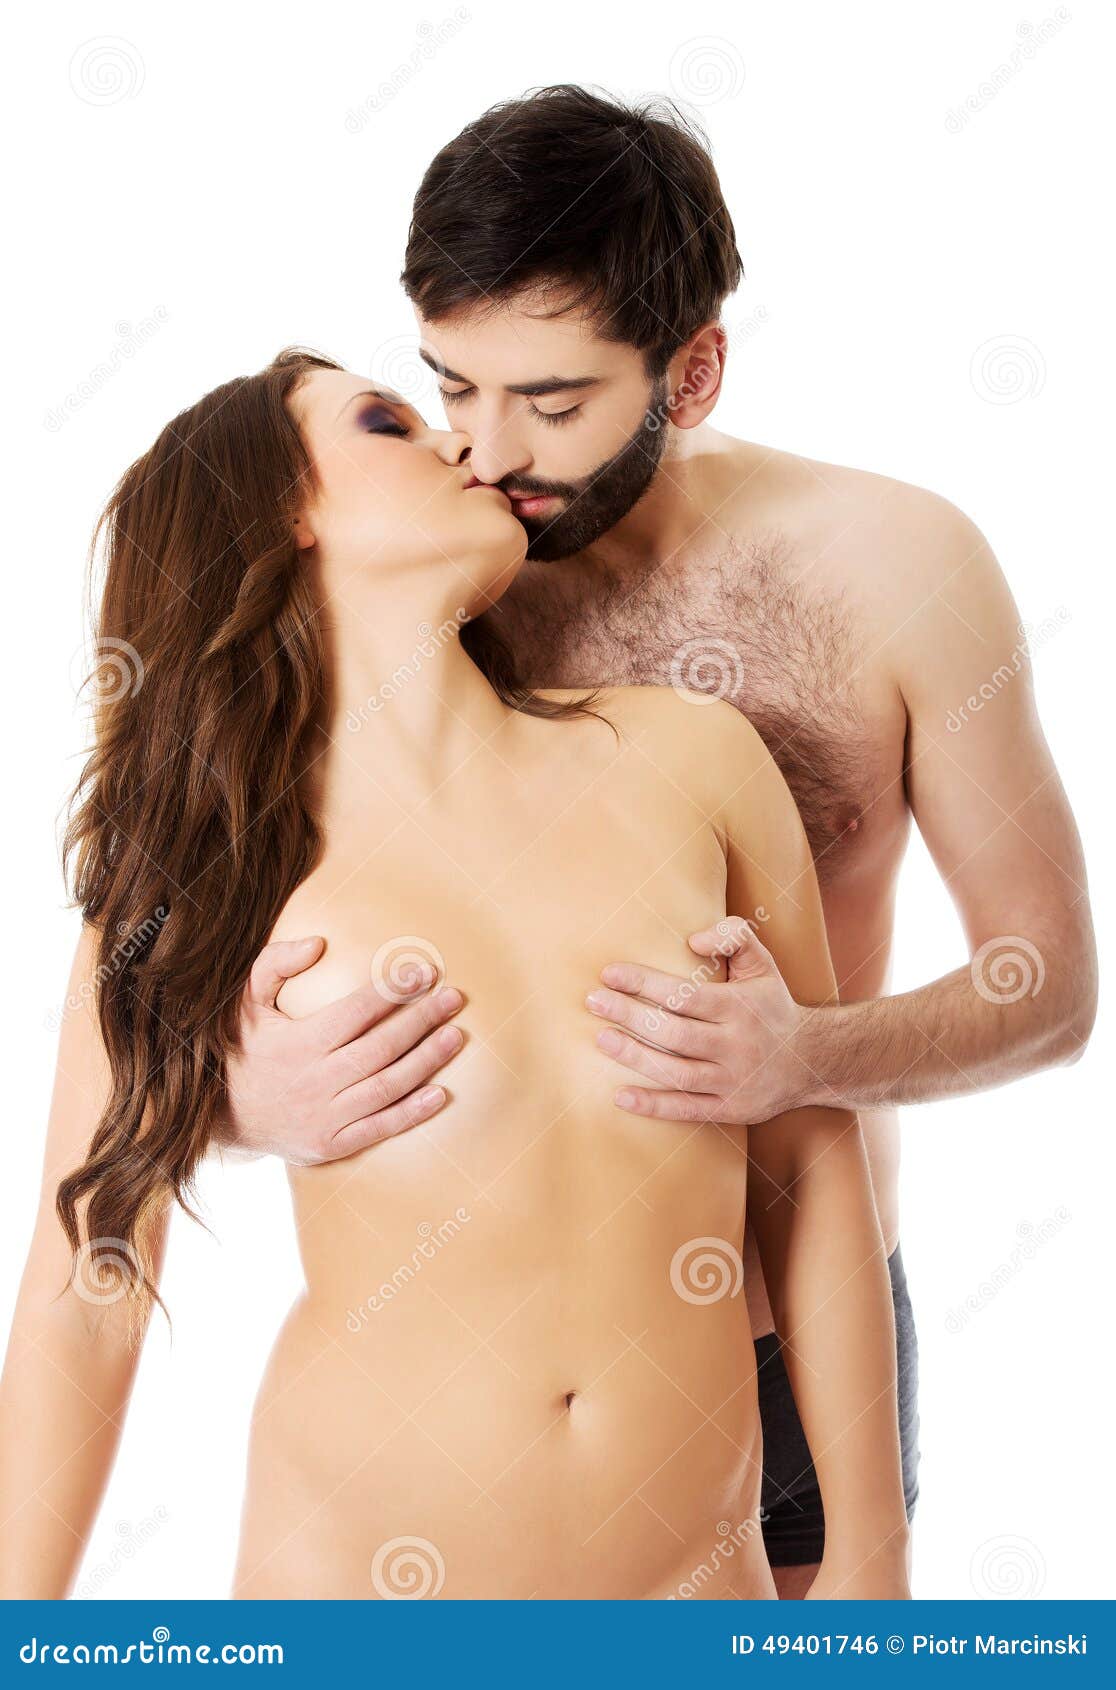 Heterosexual Couple Kissing. Stock Photo - Image of adult, passion: 49401746